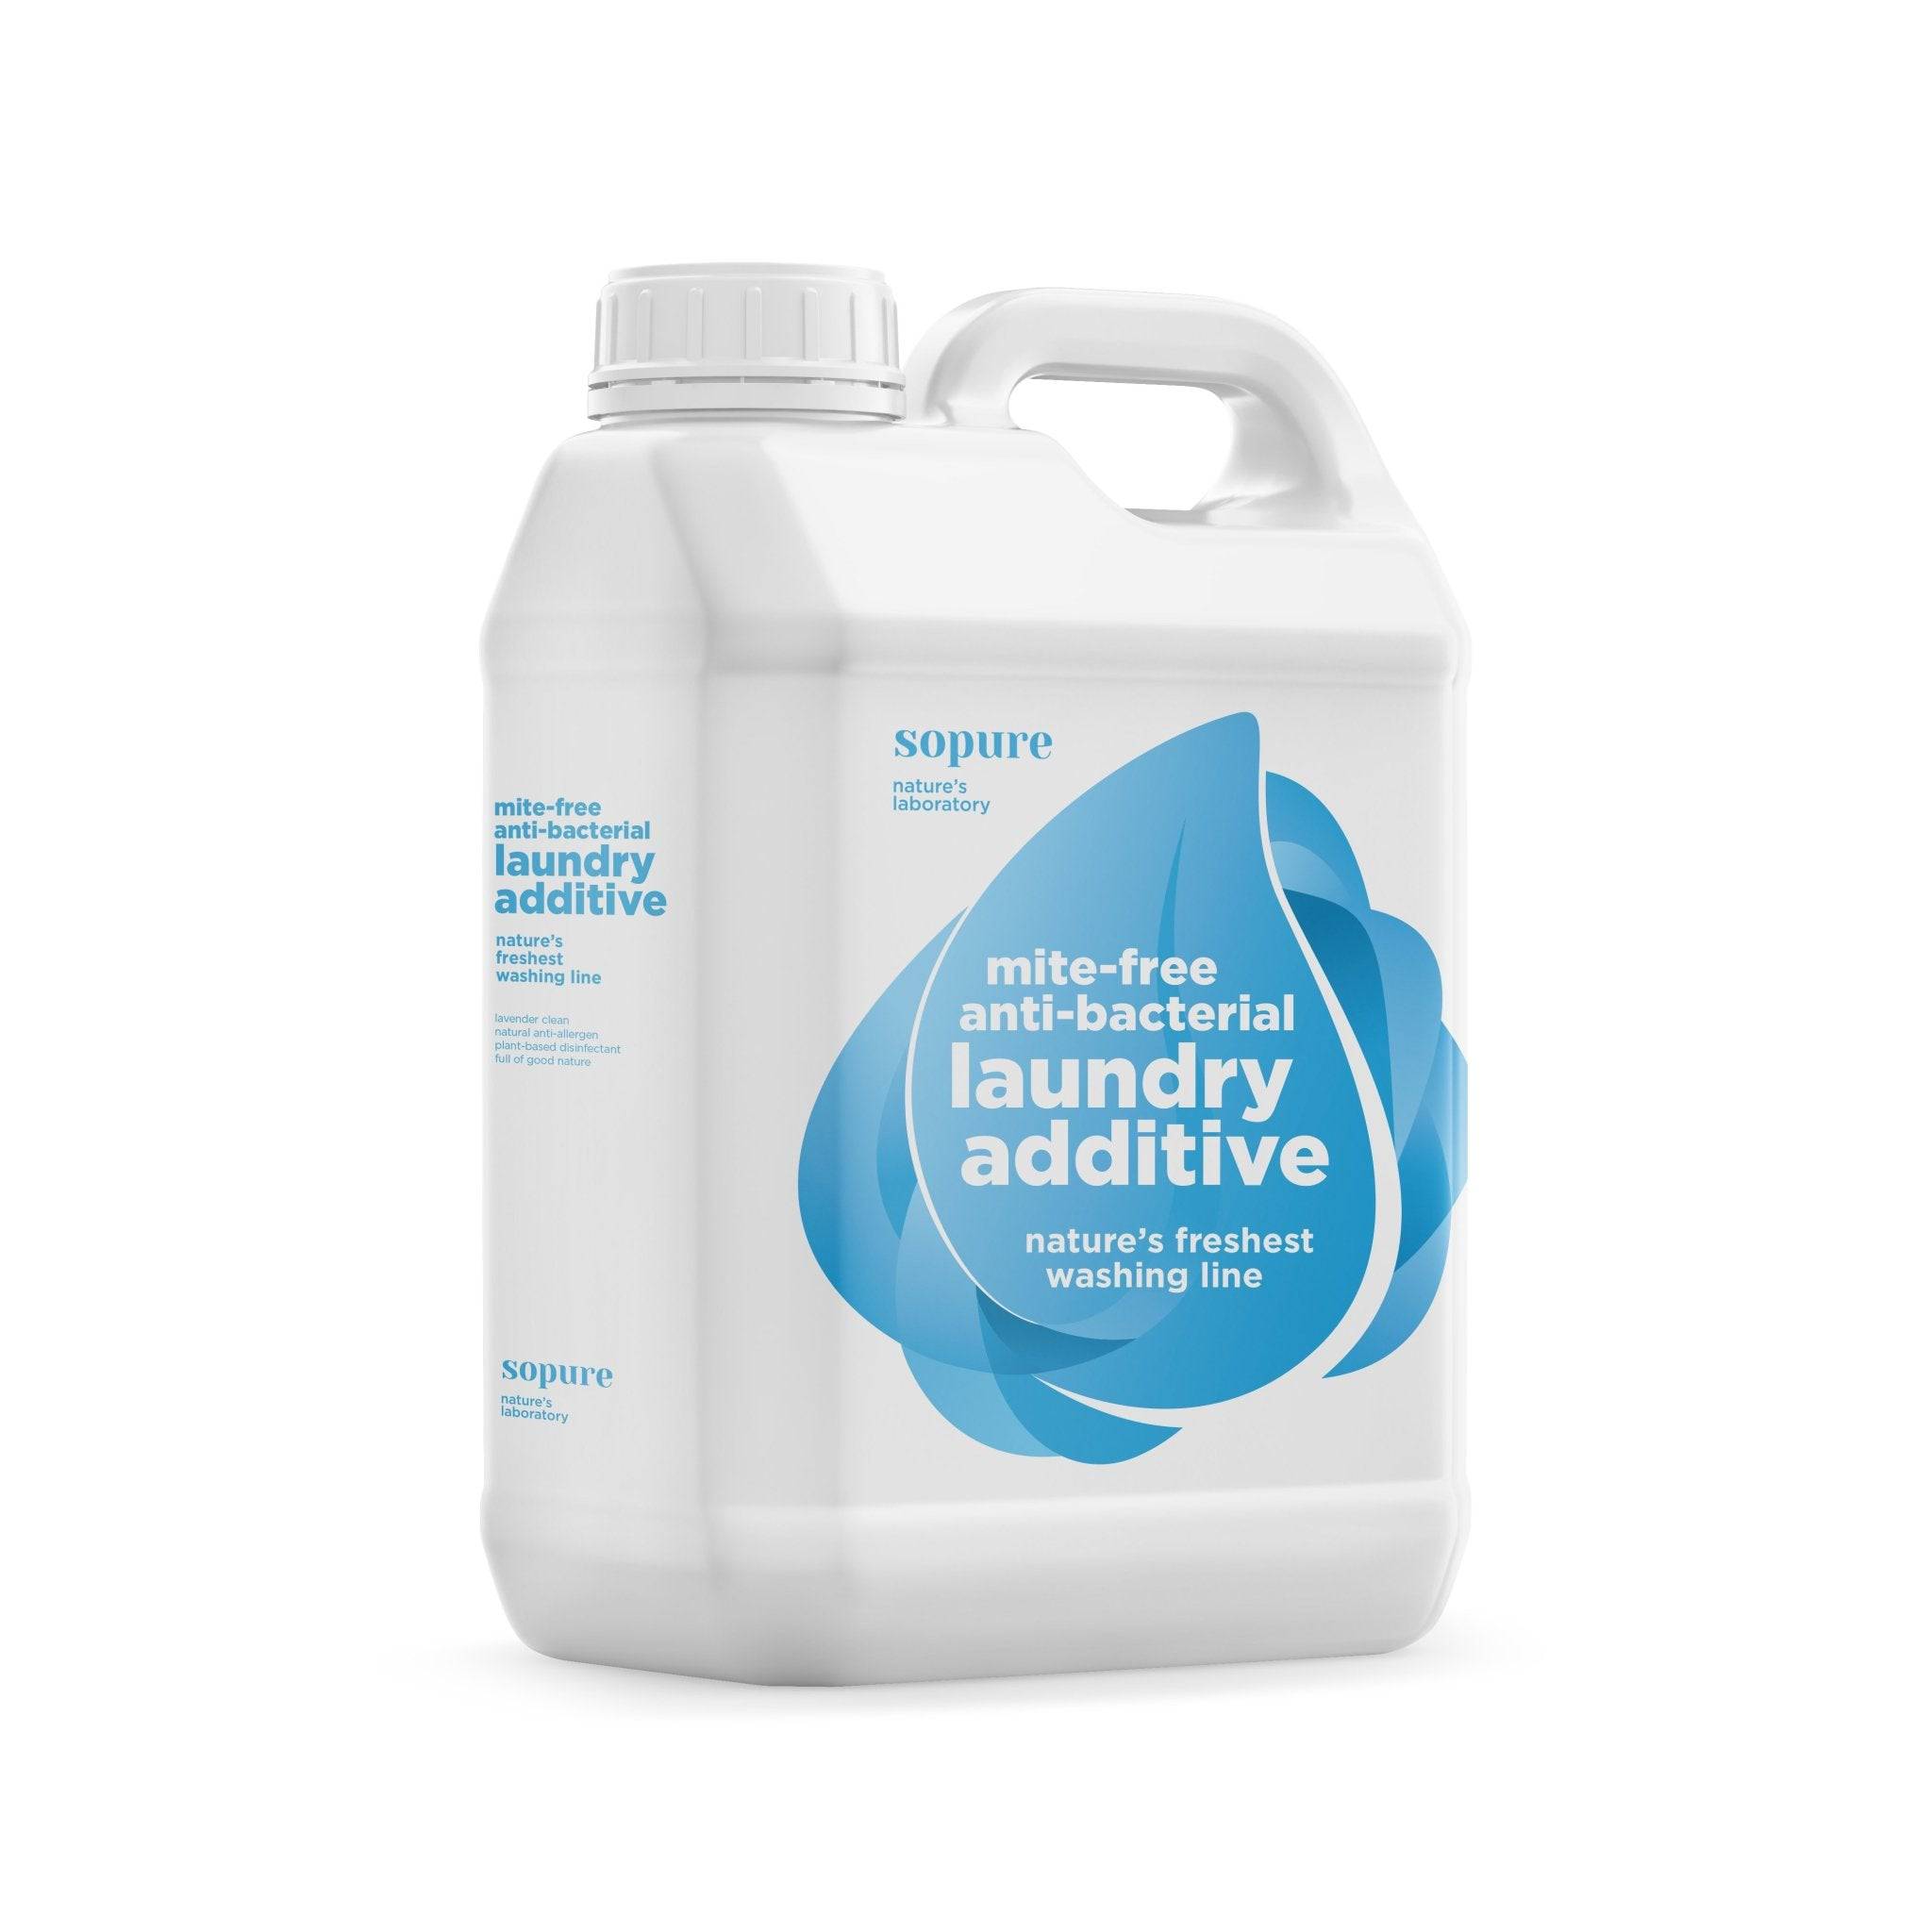 SoPure Mite-free Anti-bacterial Laundry Additive - SoPure Naturally